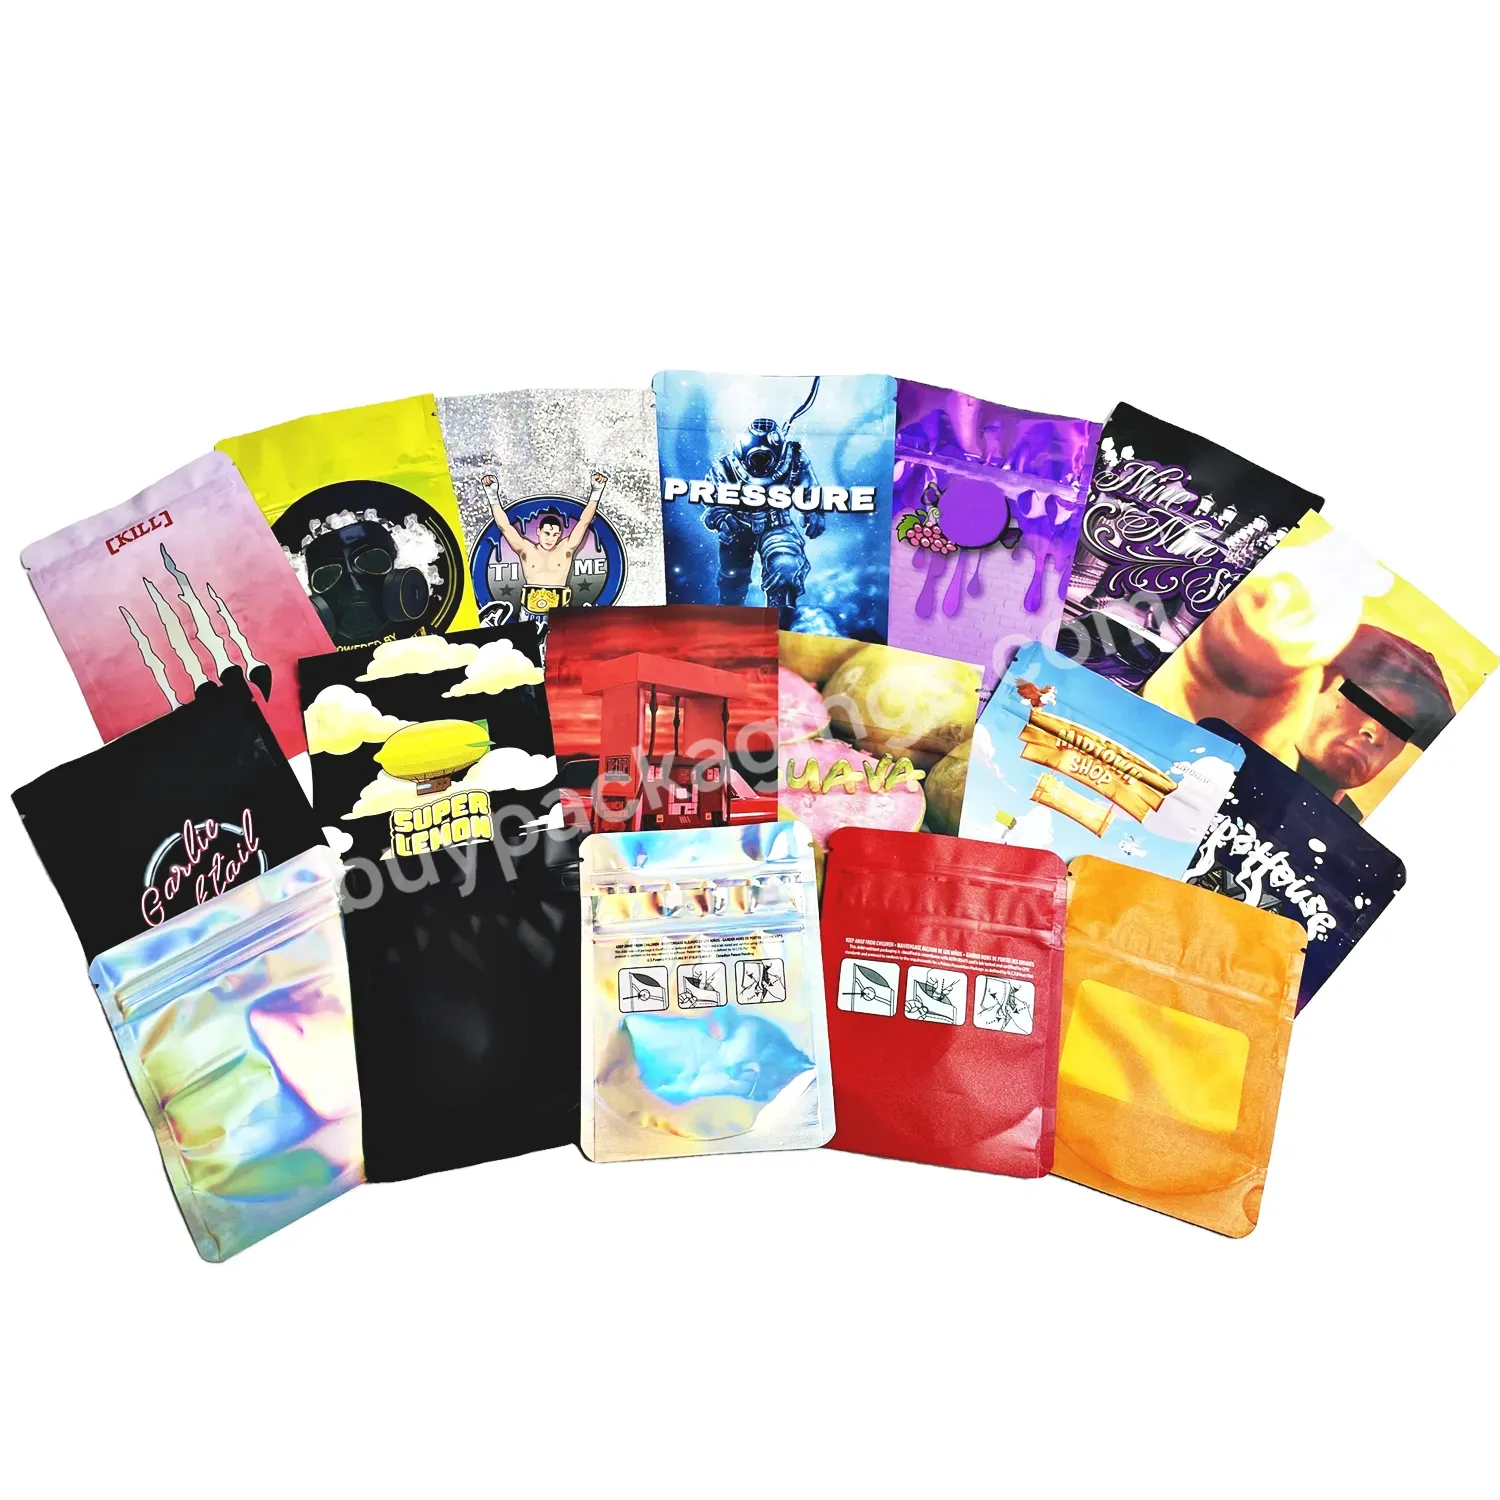 Die Cut Out Irregular Ziplock Unique Special Shaped Plastic Childproof Smell Proof Candy Packs 3.5g 7g Custom Shape Mylar Bag - Buy Custom Shape Mylar Bag Custom Logo,Die Cut Irregular Ziplock Special Shape Bag,3.5g Heat Seal Custom Mylar Bags Die Cu